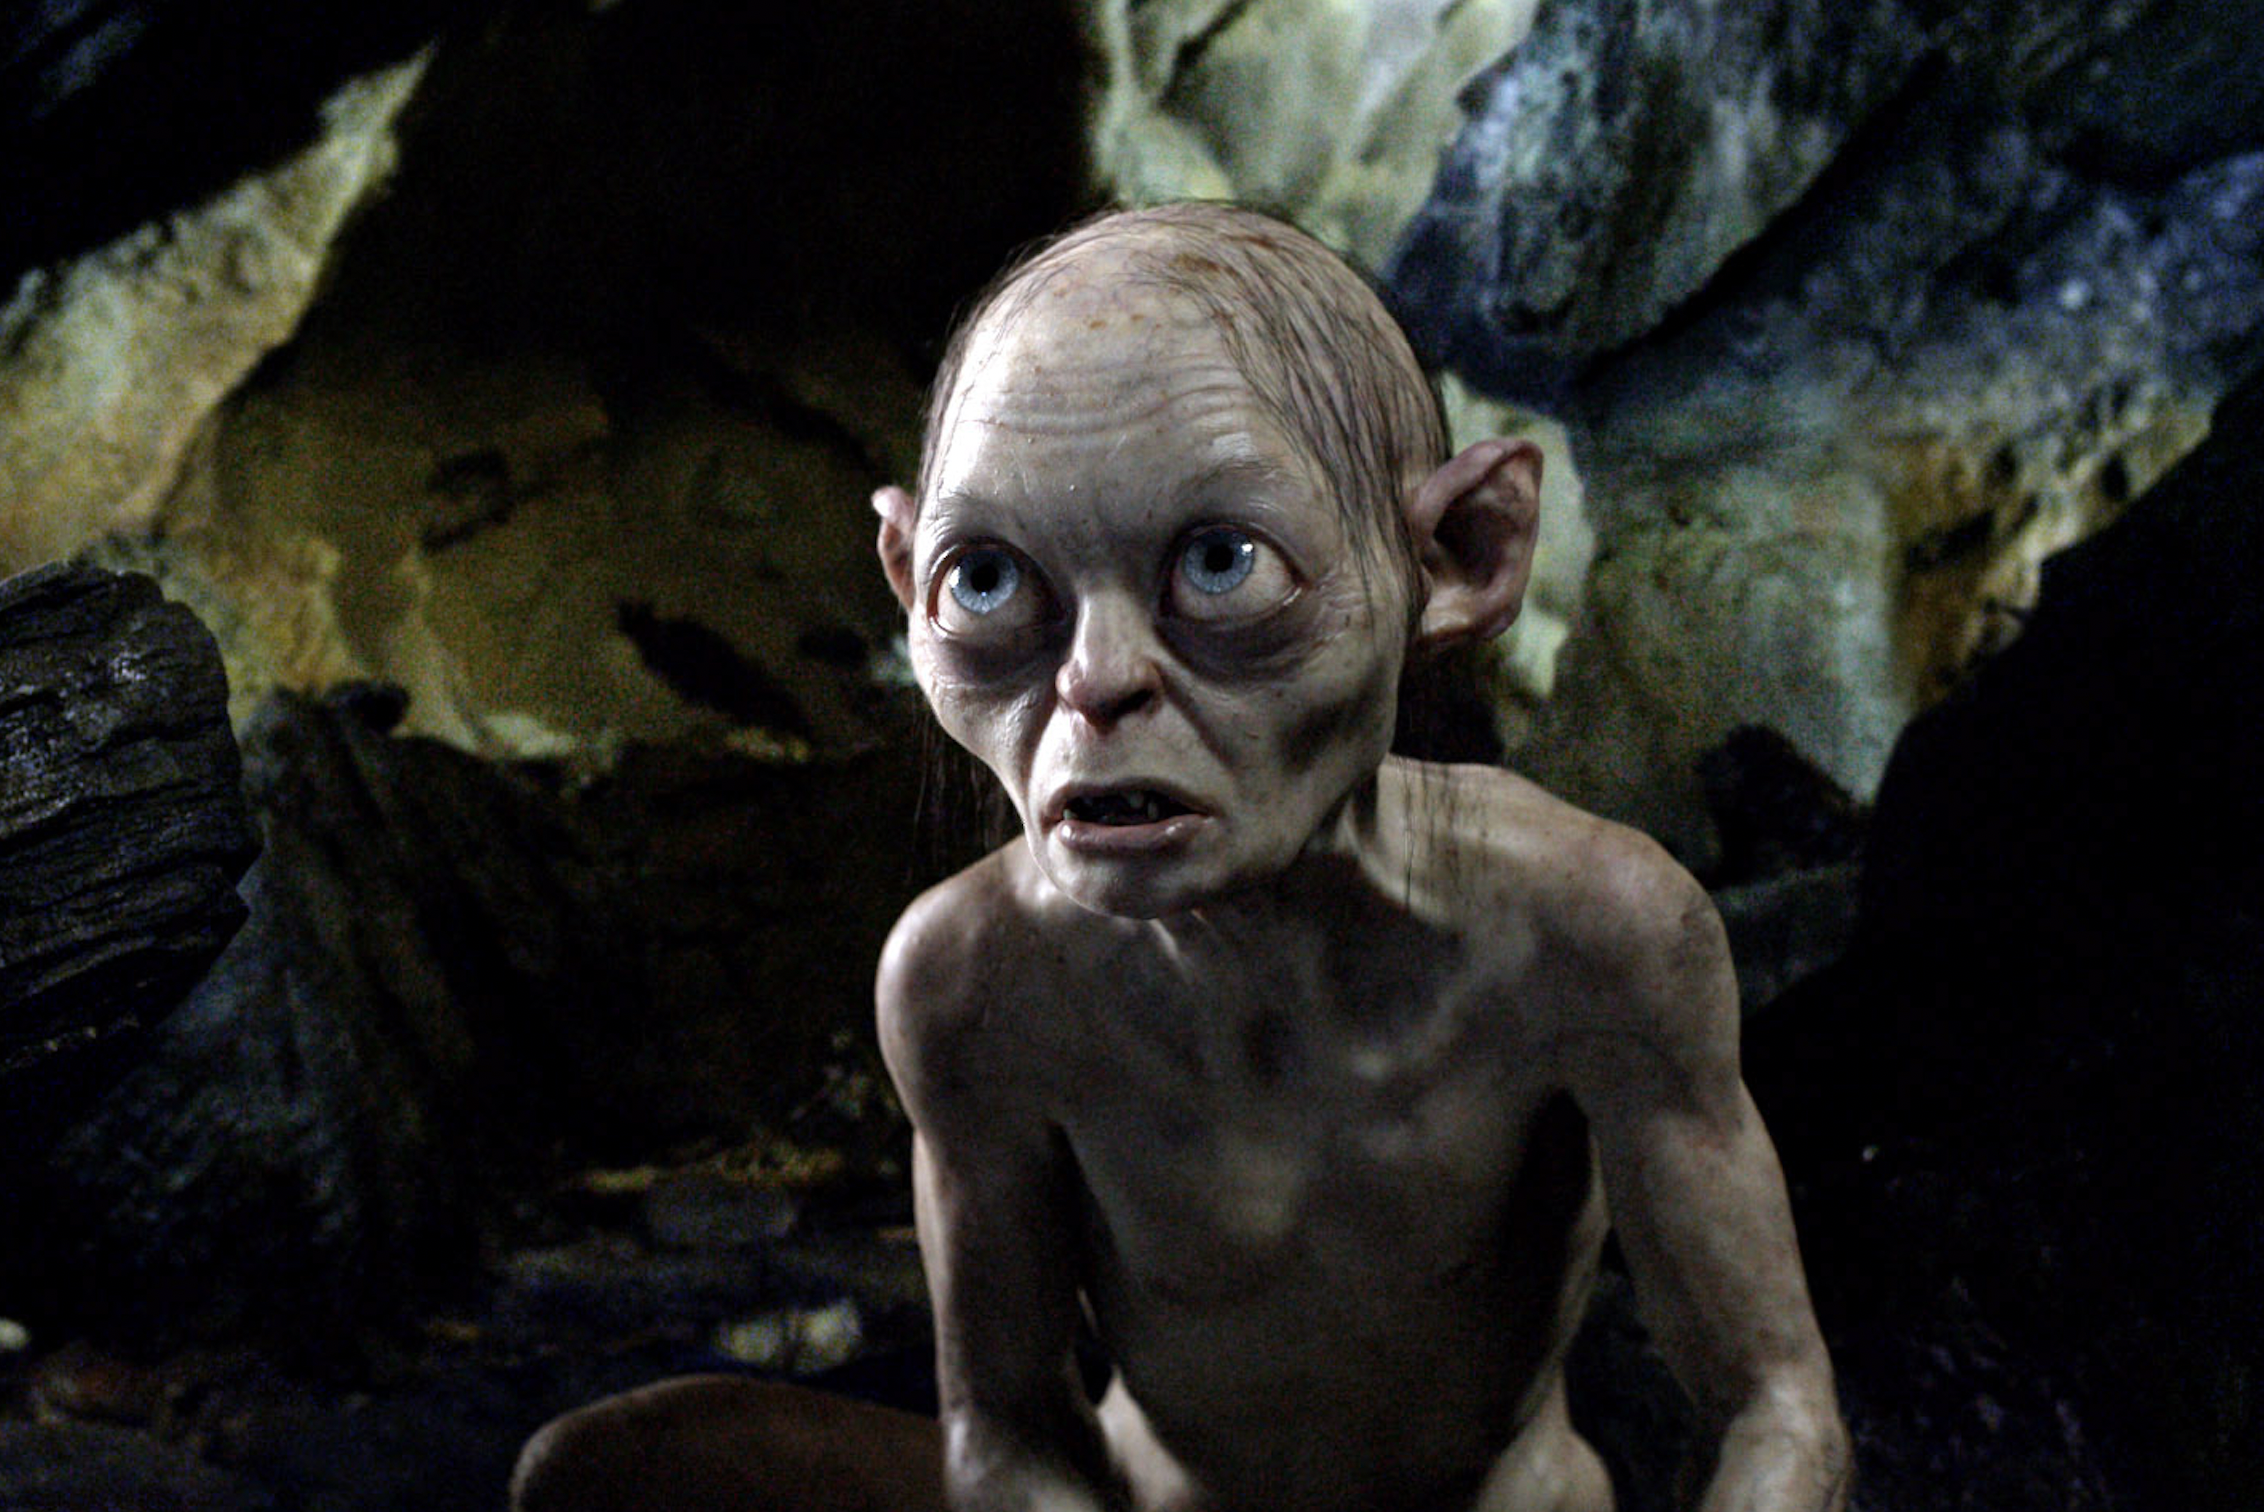 15-Year-Old ‘Hunt for Gollum’ Fan Film Restored Online After It Got Blocked Following Warner Bros.’ New ‘Lord of the Rings...